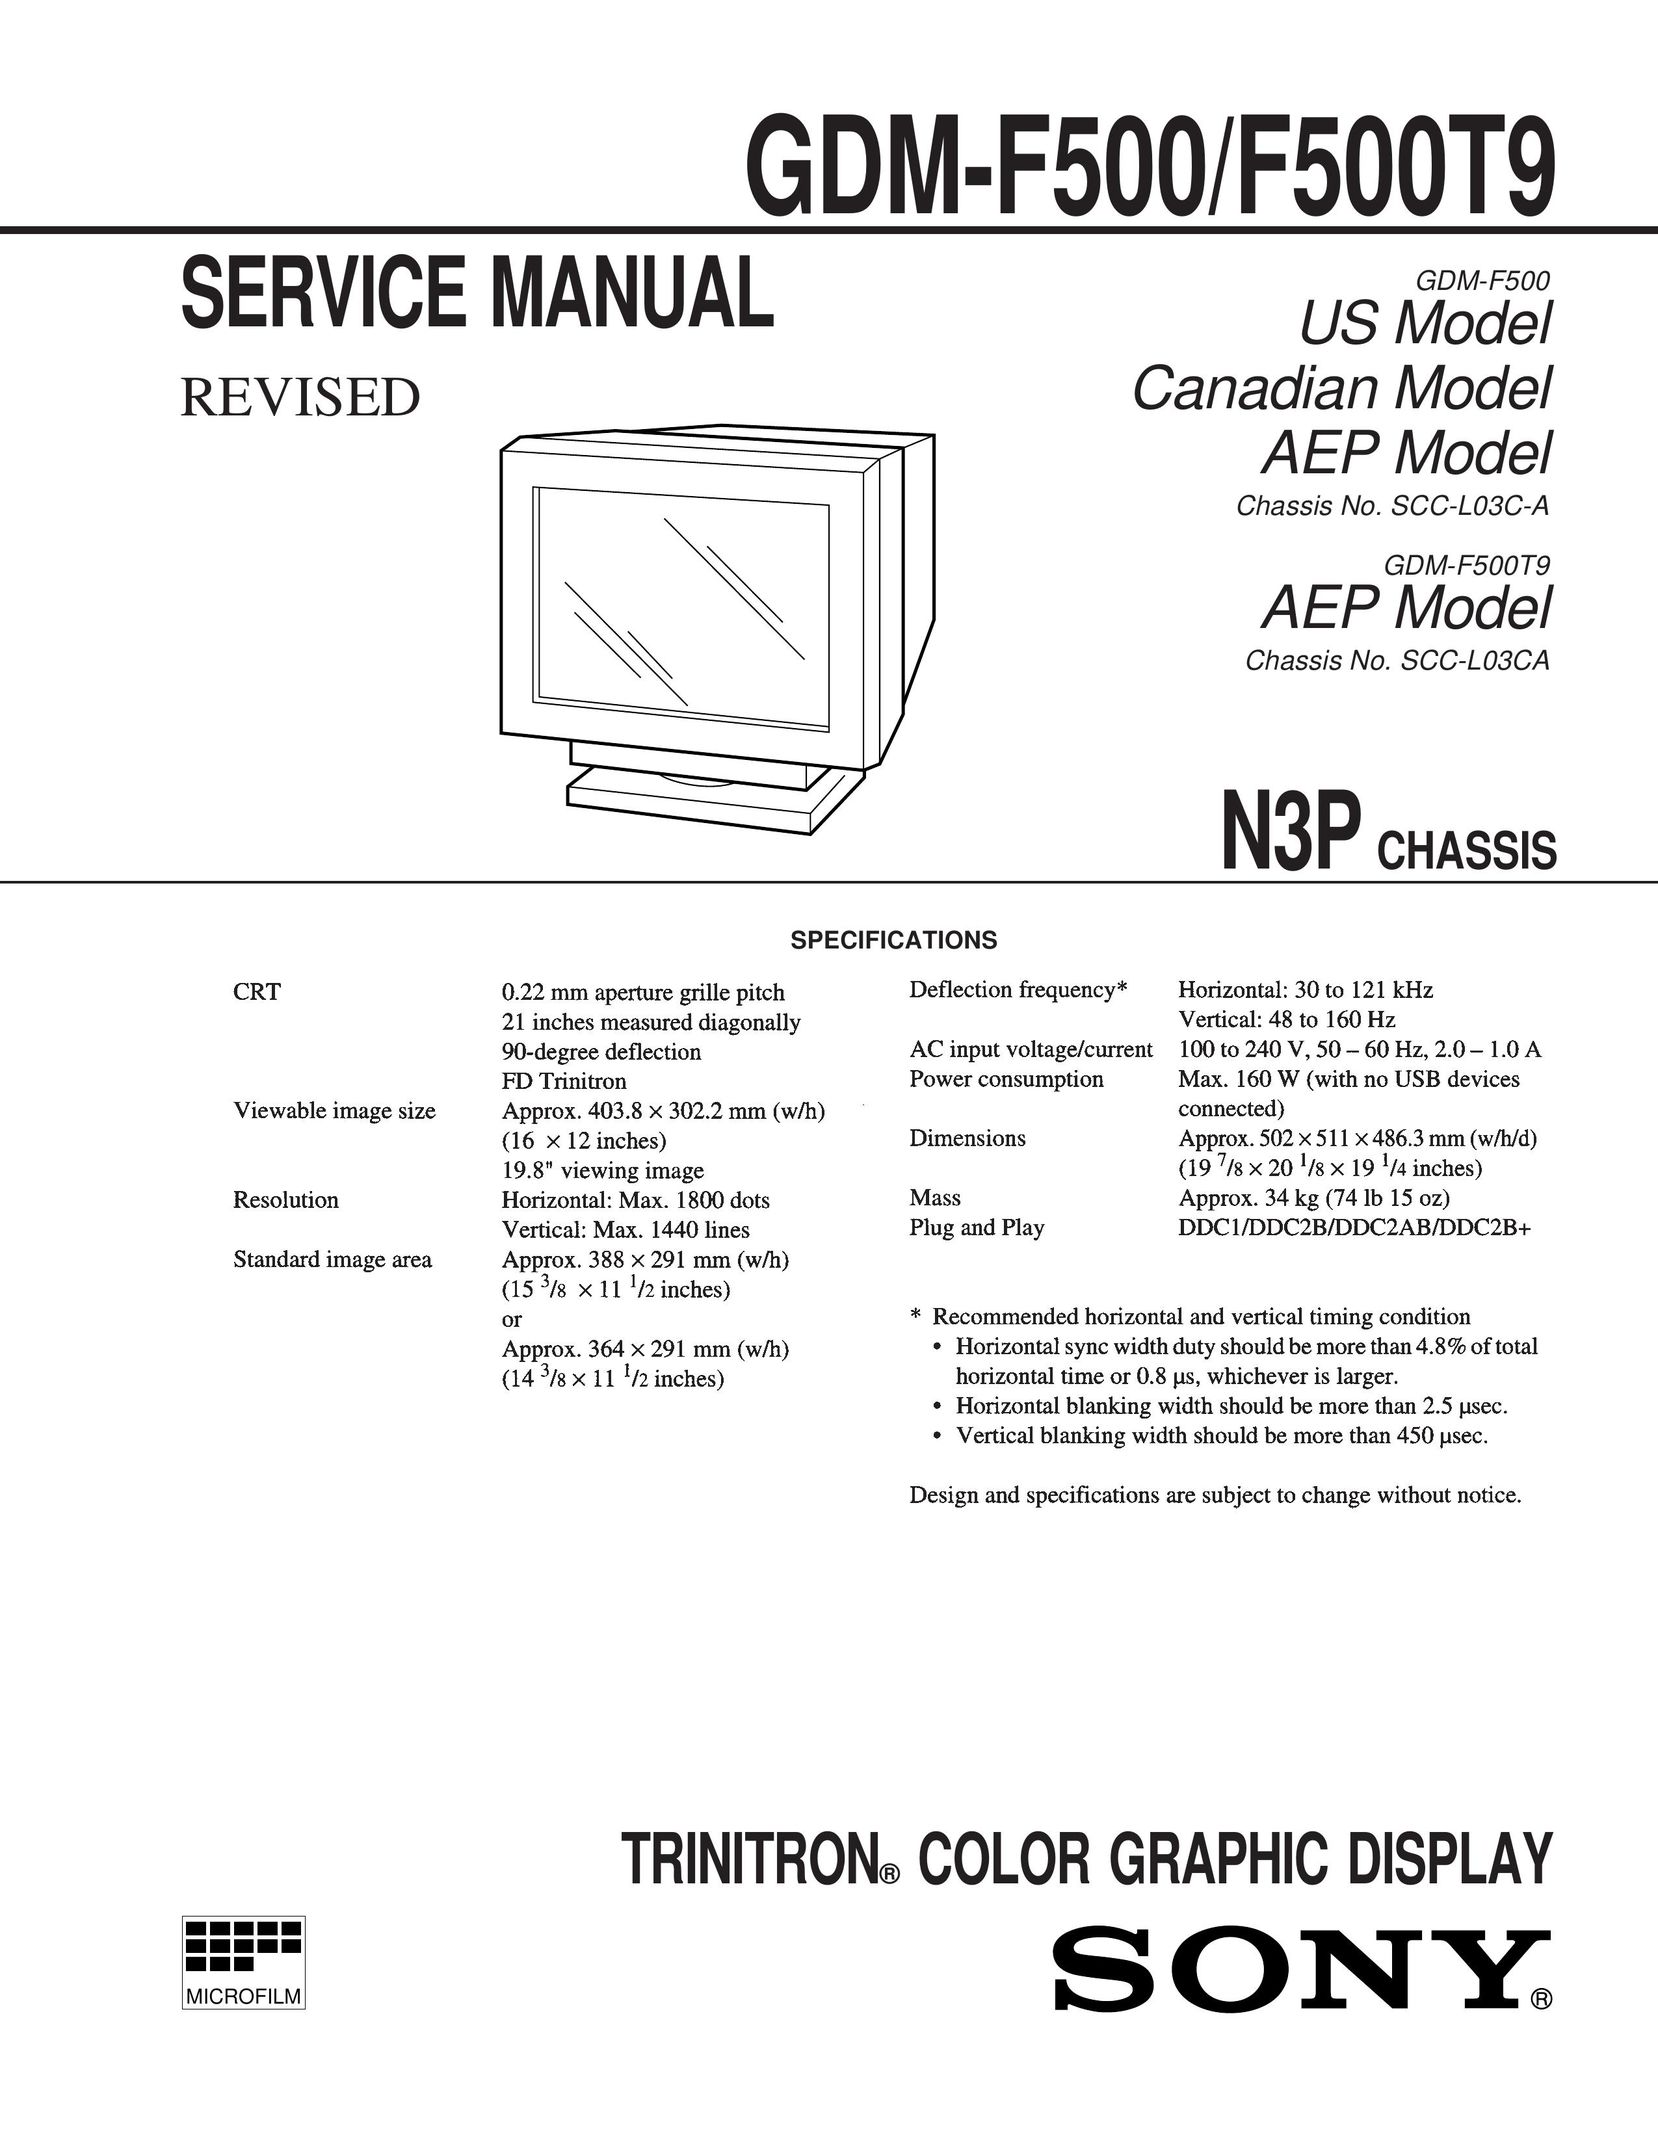 Sony GDM-F500T9 CRT Television User Manual